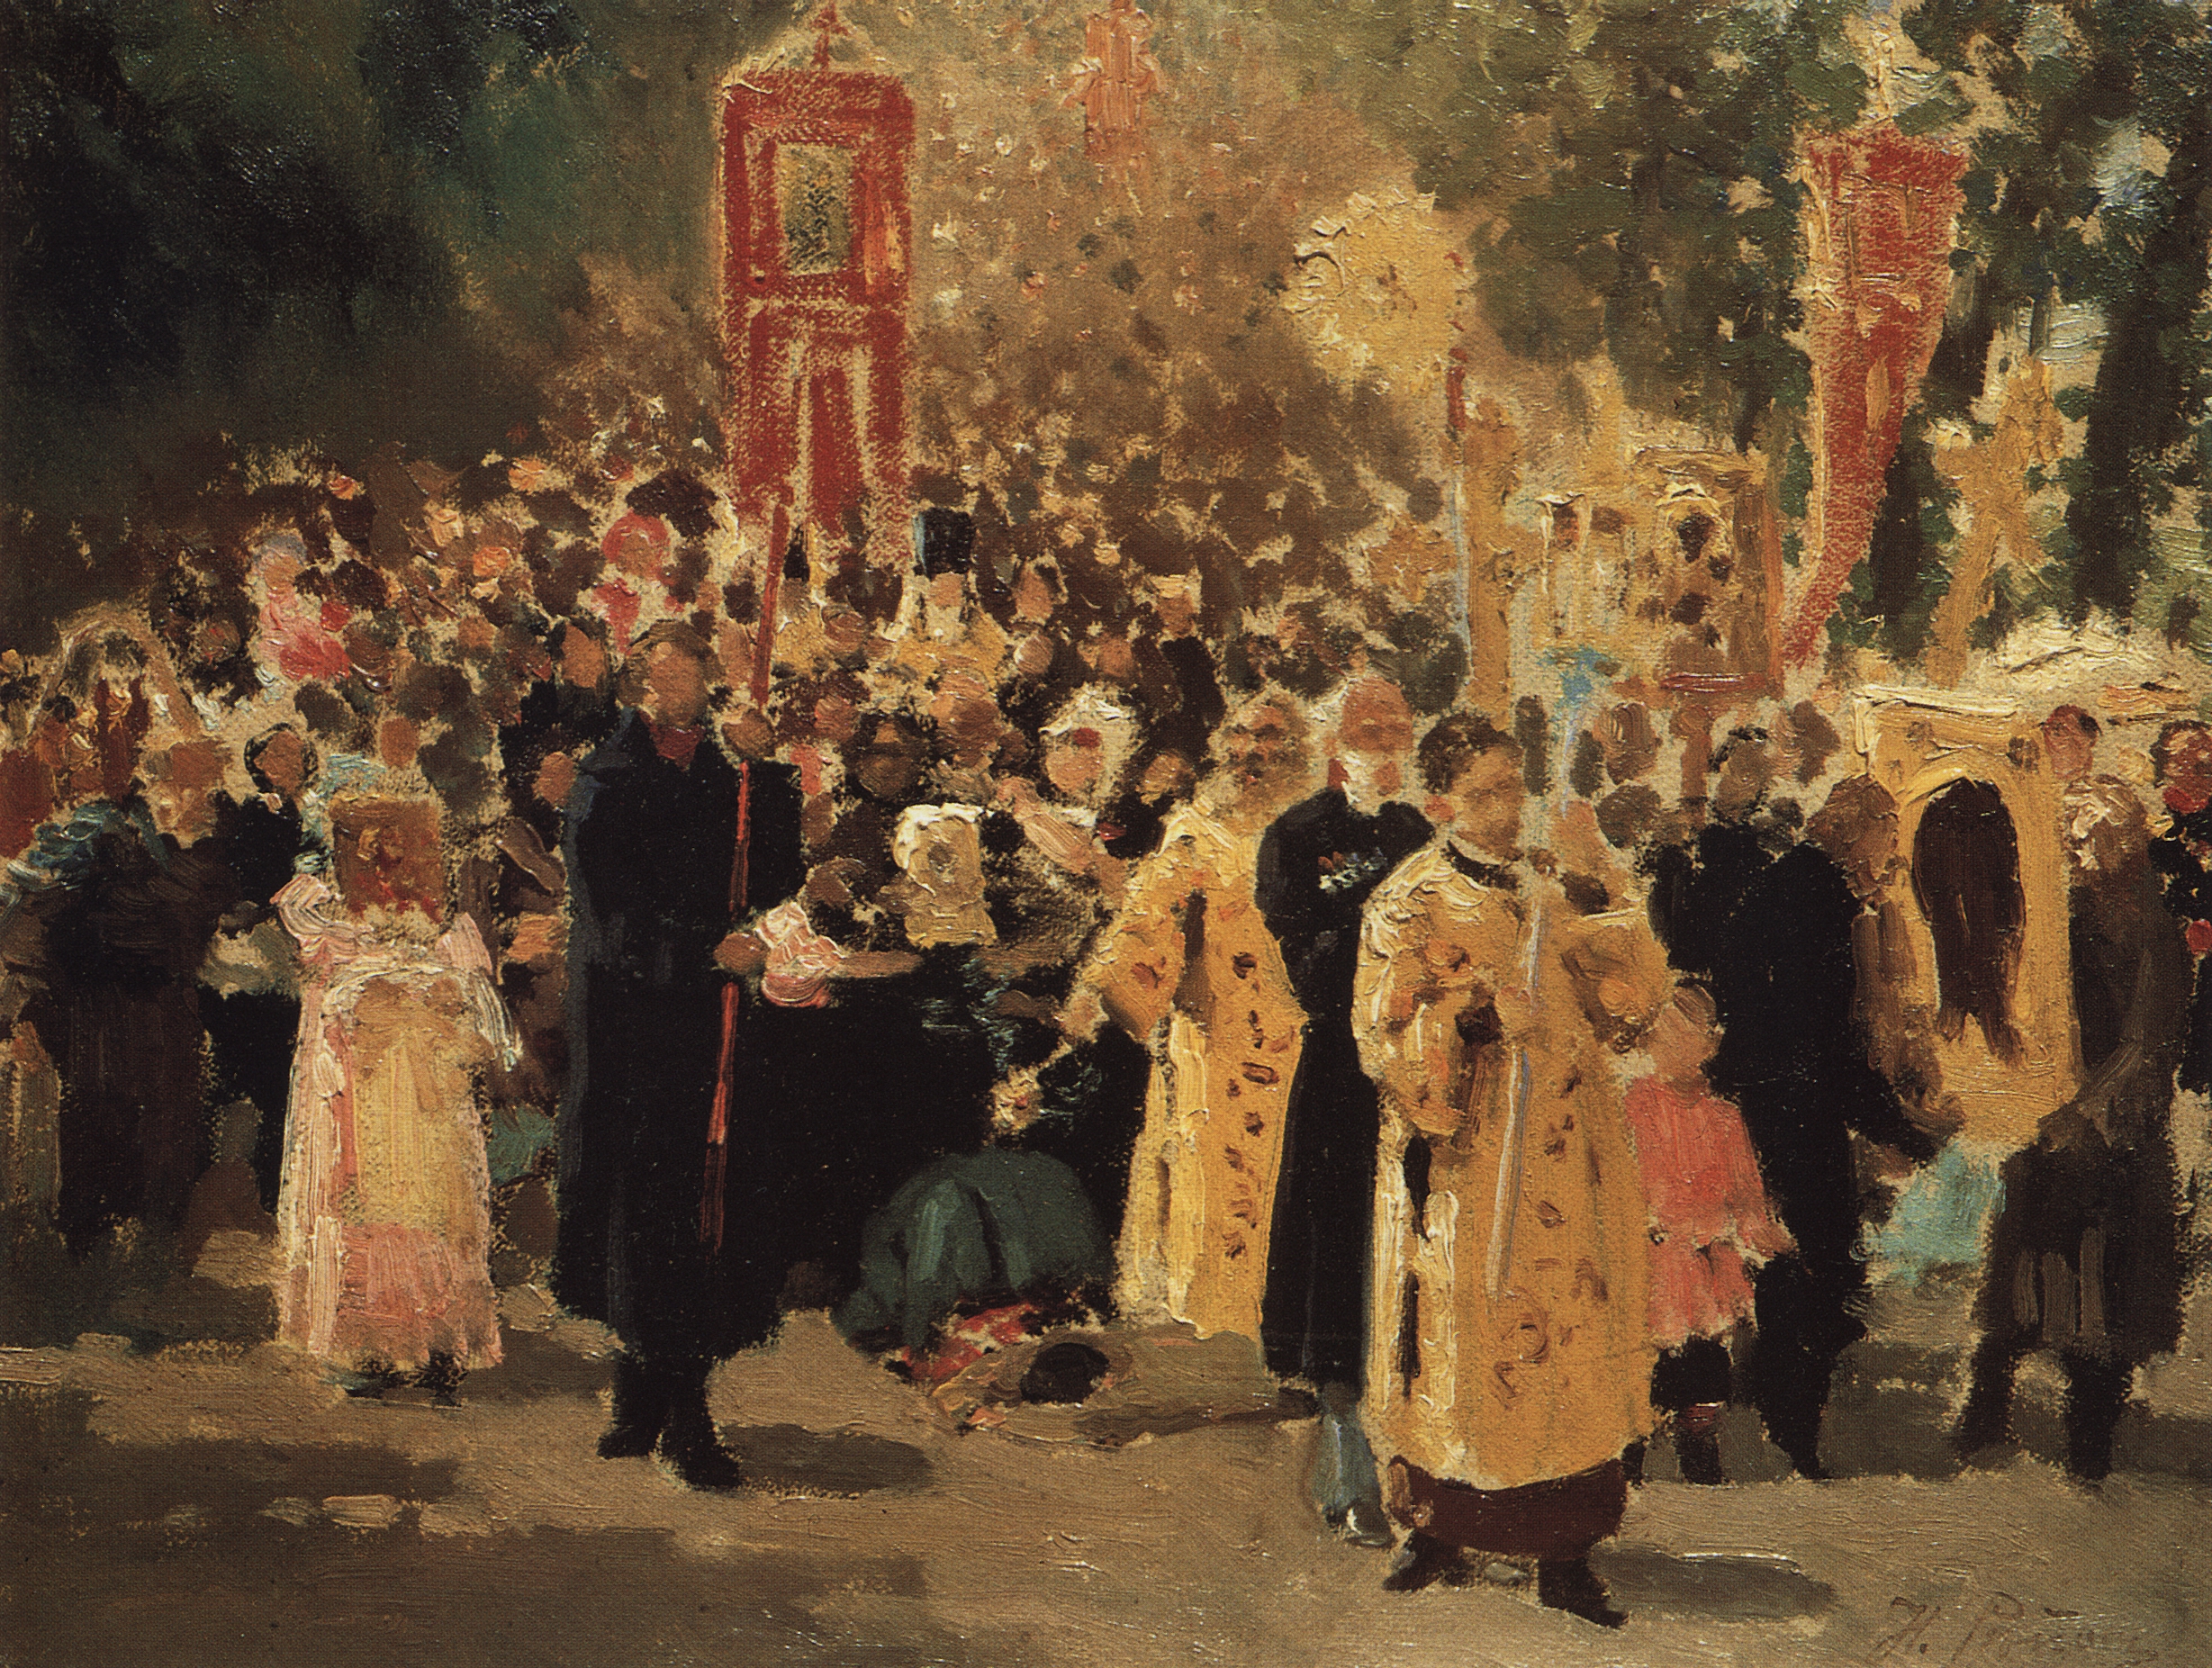 0222_Ilya Yefimovich Repin_Religious procession in an oak wood 썸네일